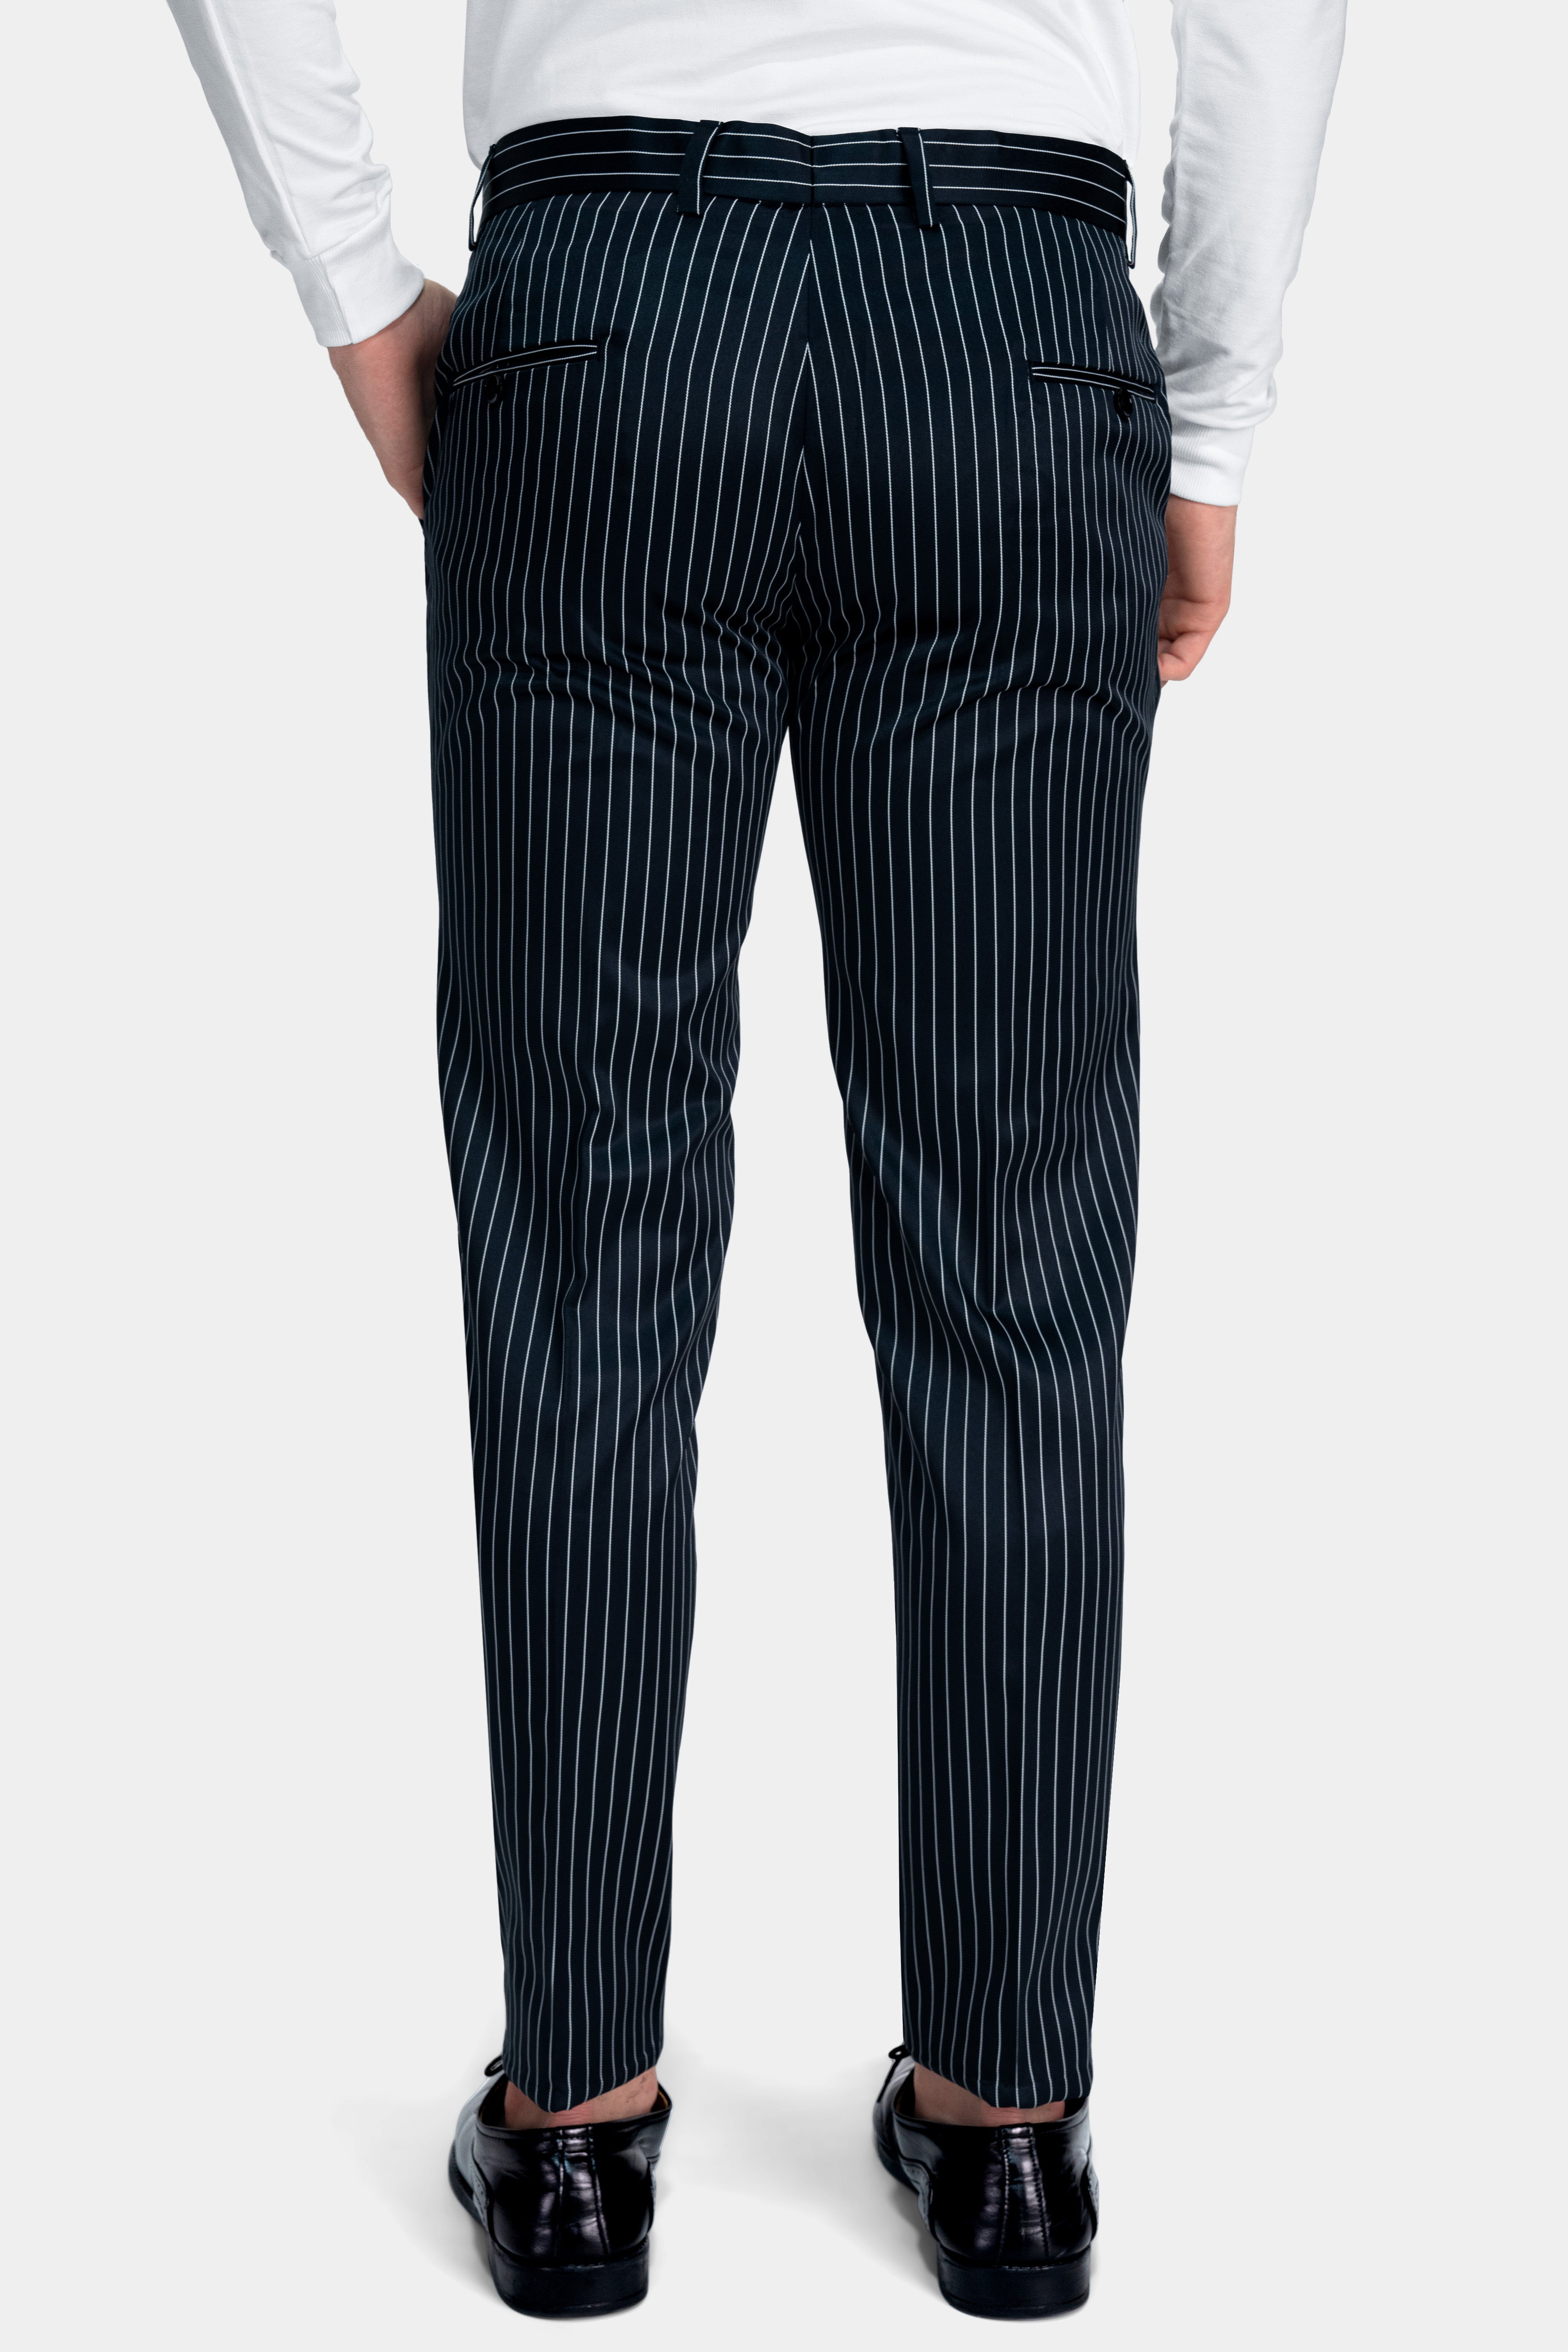 Gunmetal Blue with White Striped Wool Rich Pant T2772-28, T2772-30, T2772-32, T2772-34, T2772-36, T2772-38, T2772-40, T2772-42, T2772-44